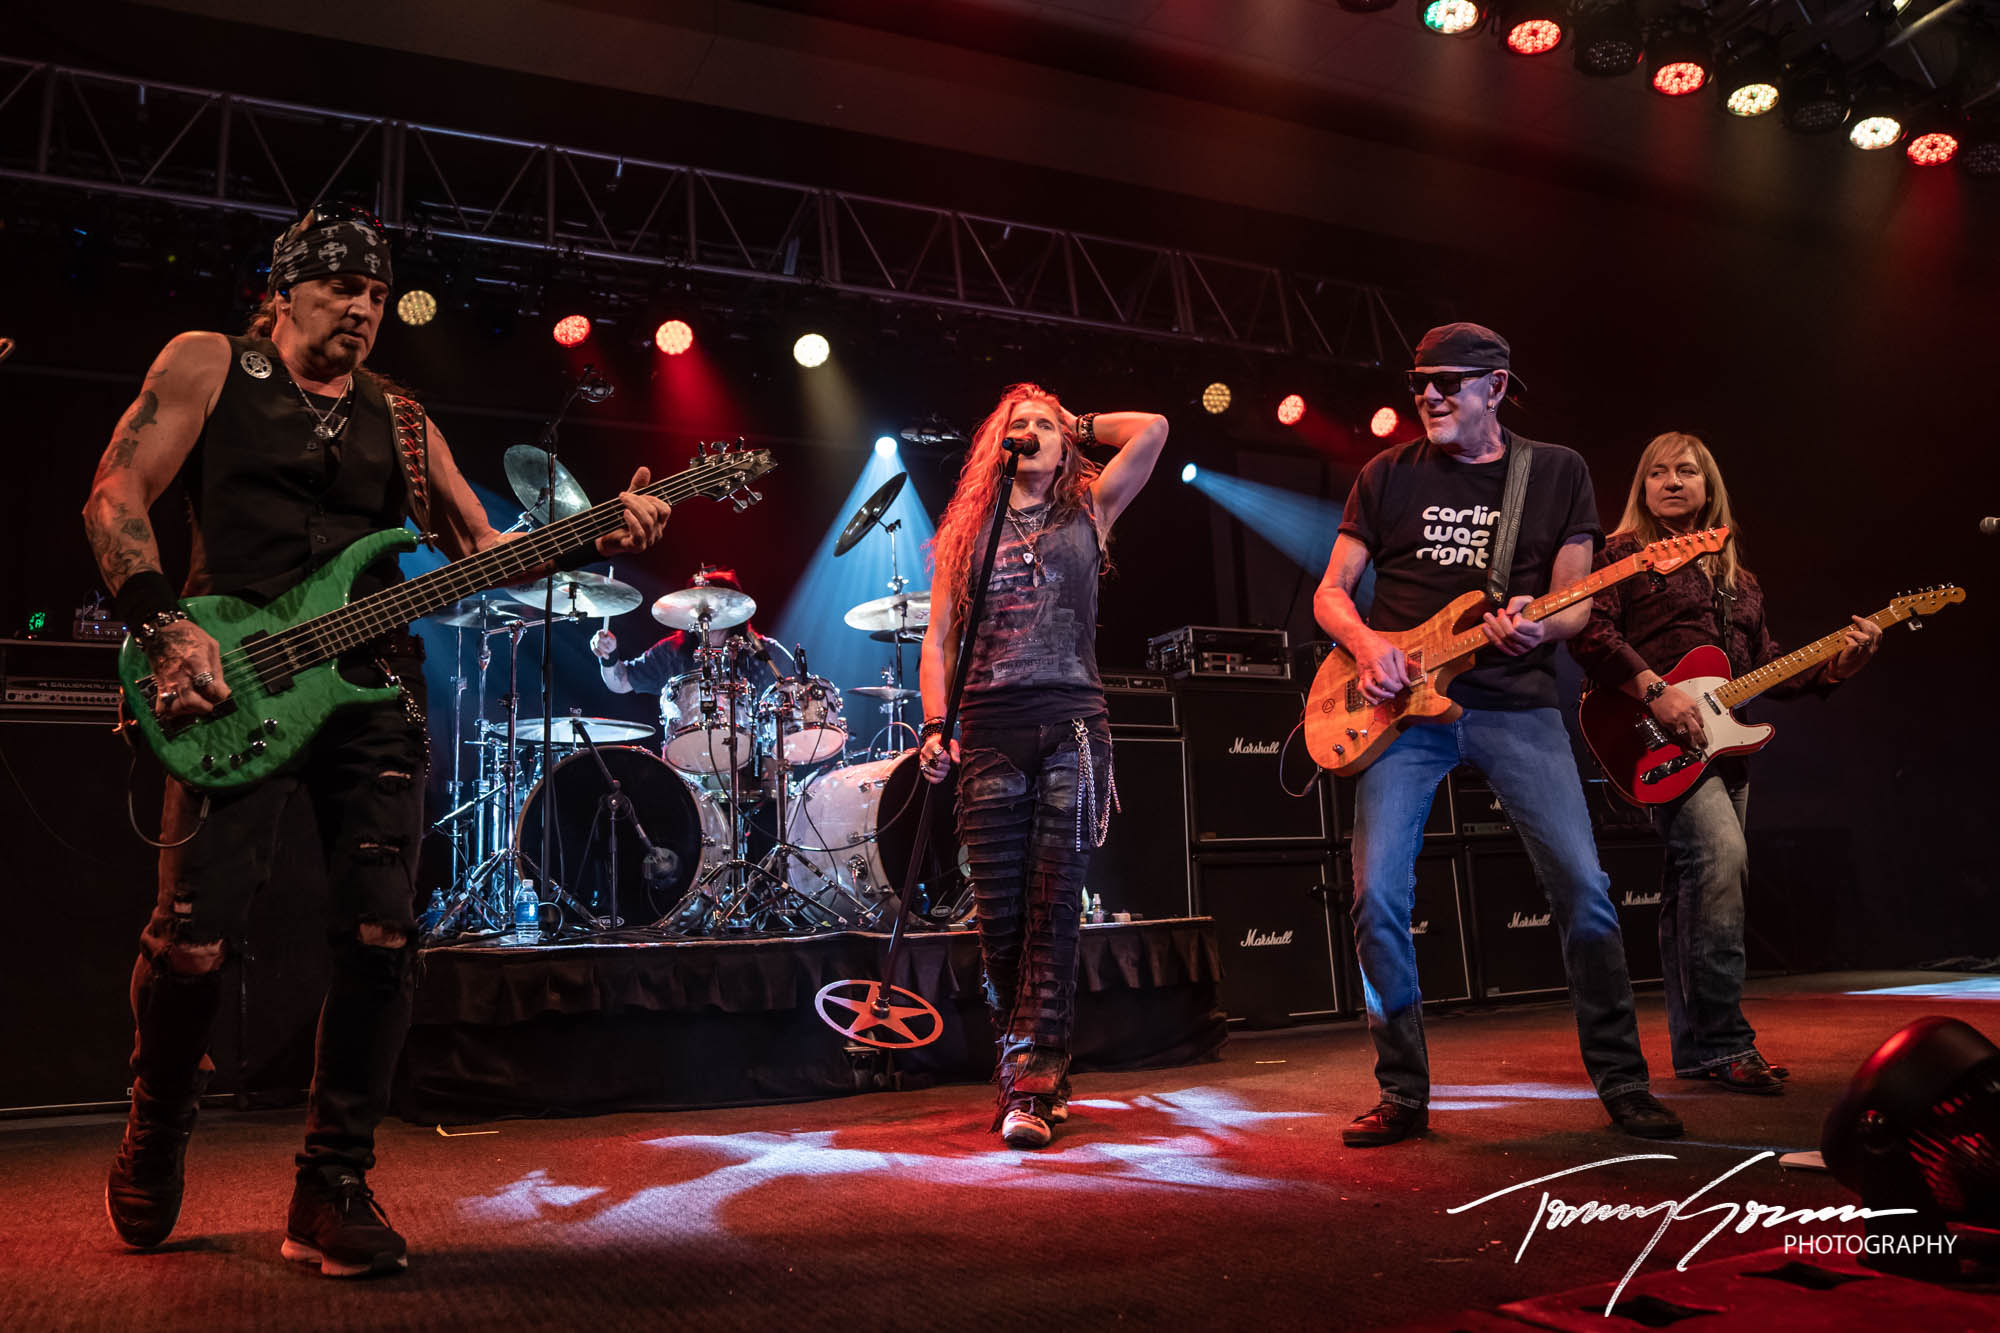 LIVE REVIEW: Great White and Slaughter - Grand Casino Hinckley, Hinckley, MN - The Rockpit 2000x1340